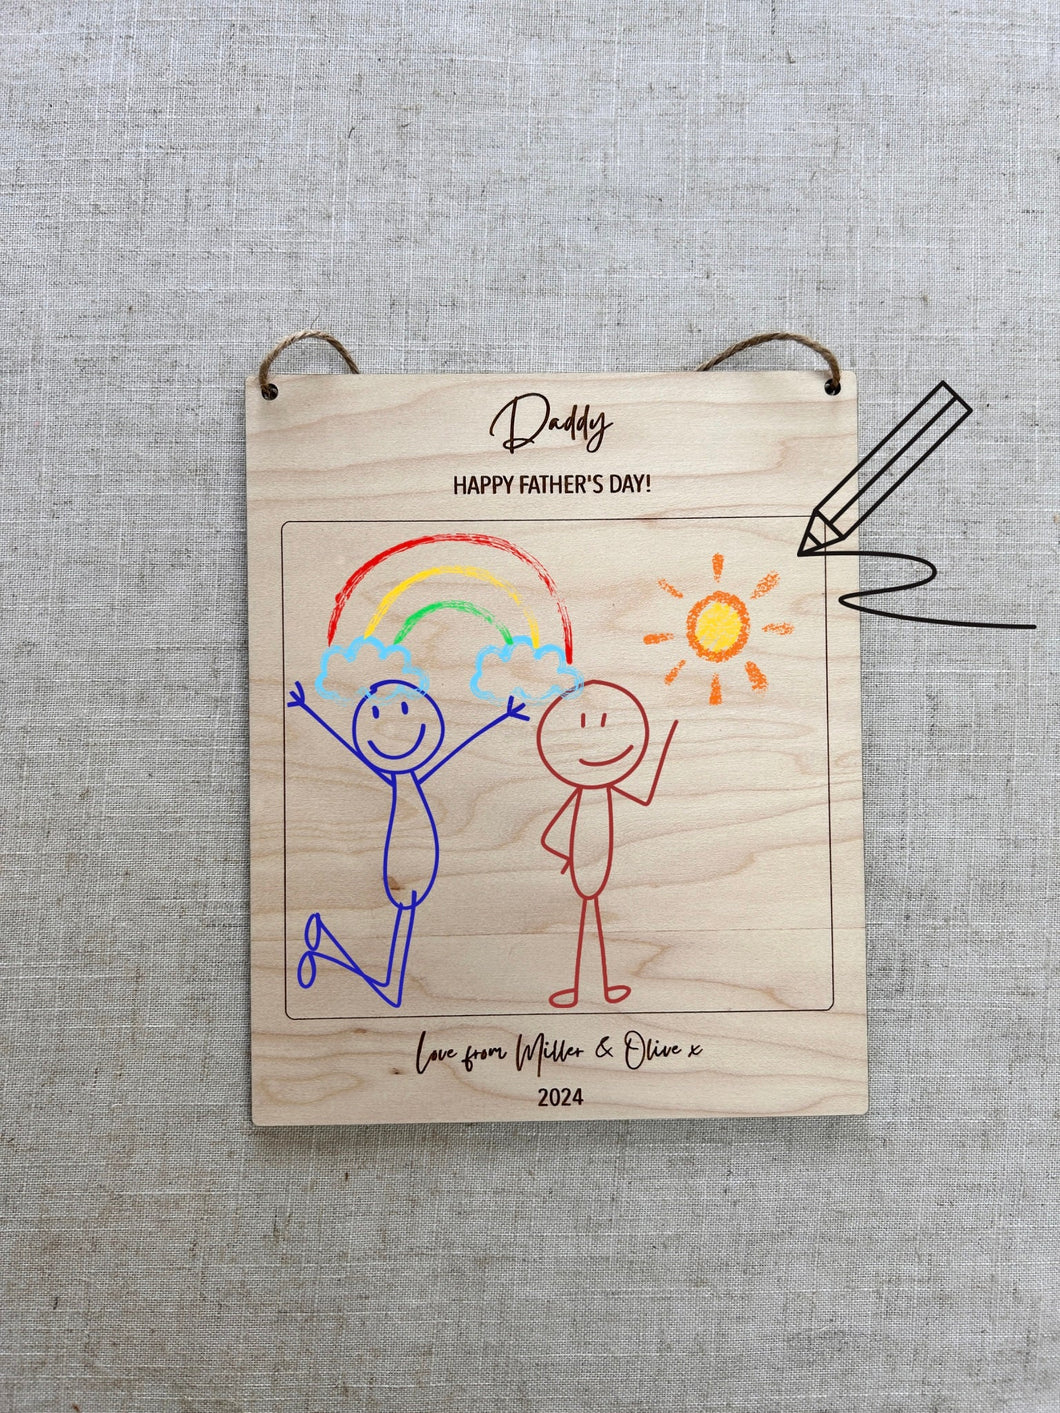 FREE POSTAGE - Daddy Father's Day Gift, Personalised Gift for Dad, Drawing Gifts, Father's Day 2024, Keepsake Gifts, Gift from Kids to Dad